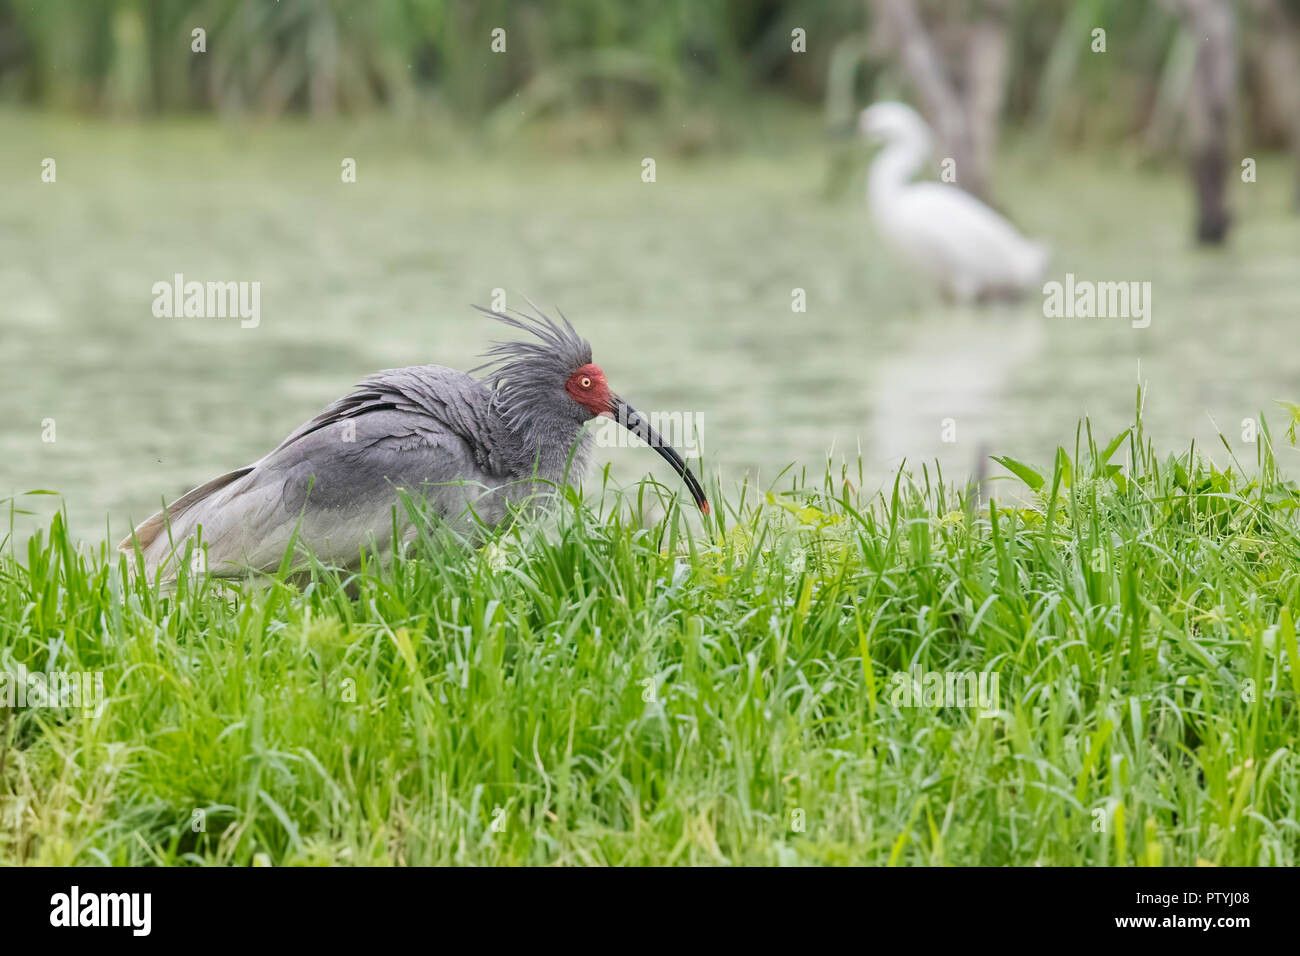 Crested Ibis Foto Stock